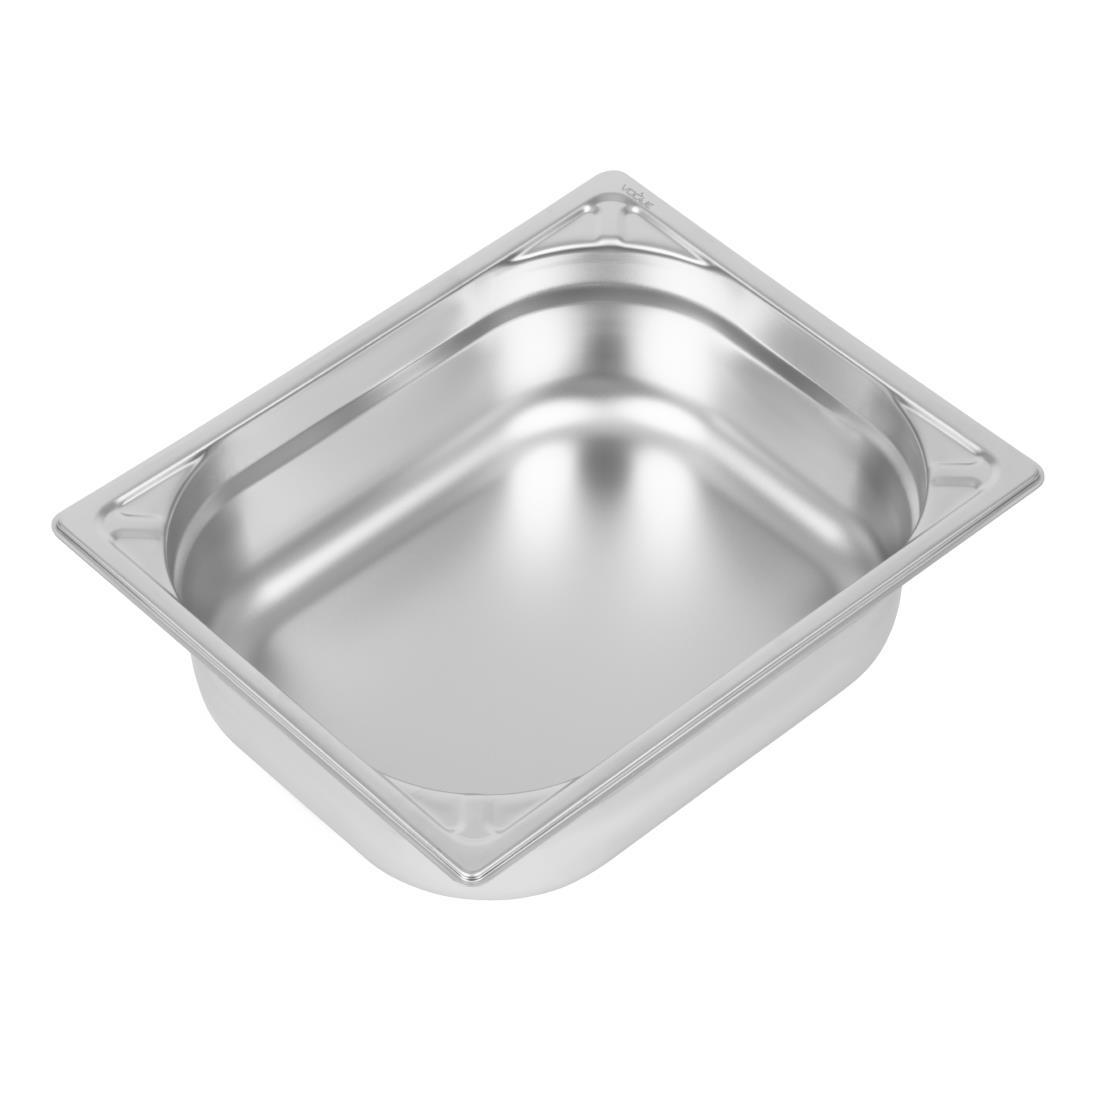 Vogue Heavy Duty Stainless Steel 1/2 Gastronorm Pan 100mm - DW439  - 1